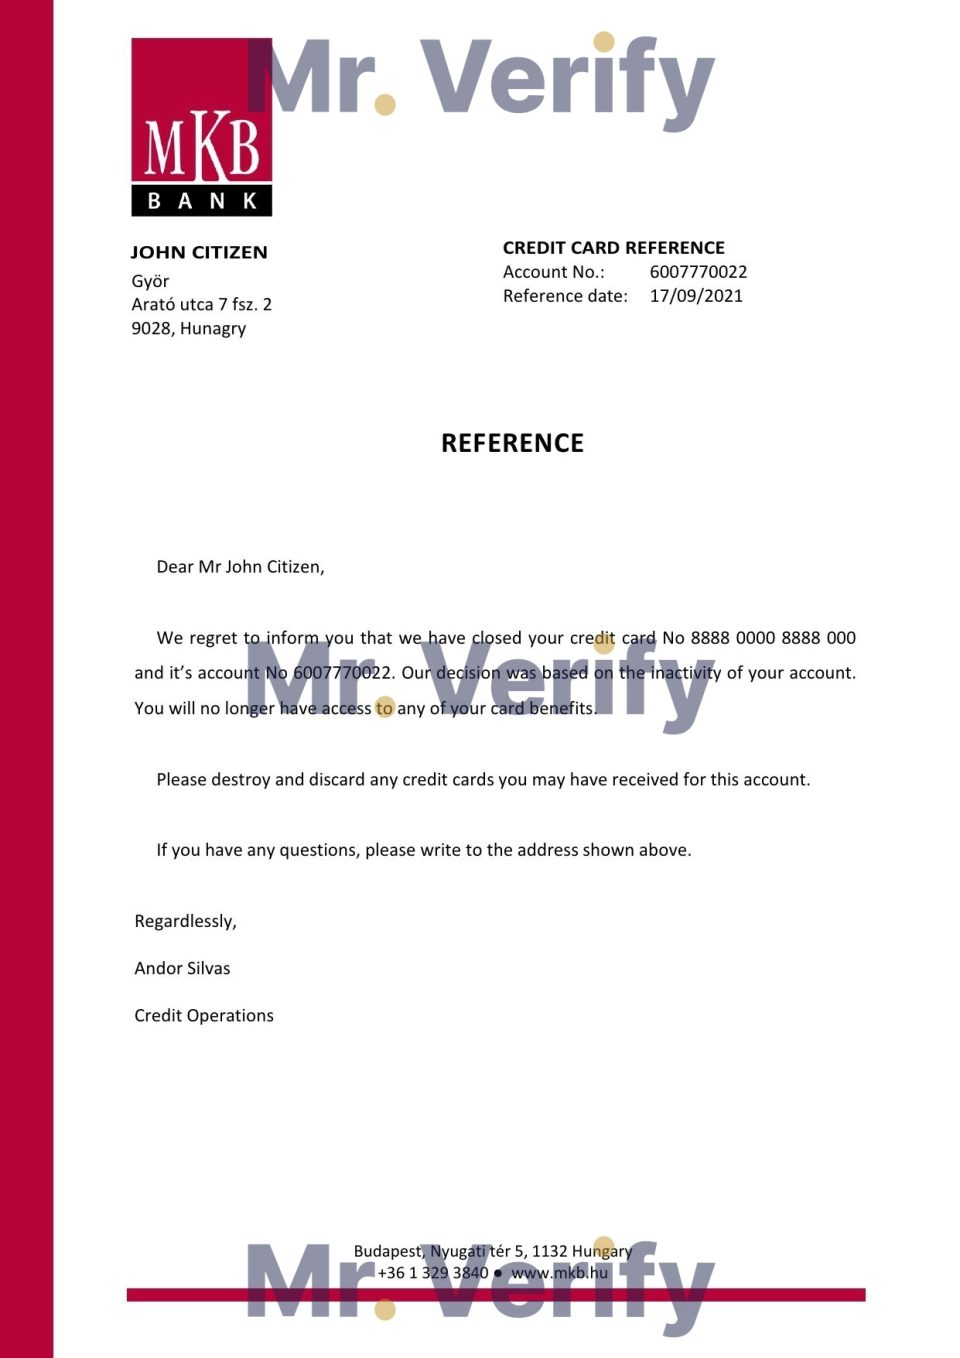 Download Hungary MKB Bank Reference Letter Templates | Editable Word